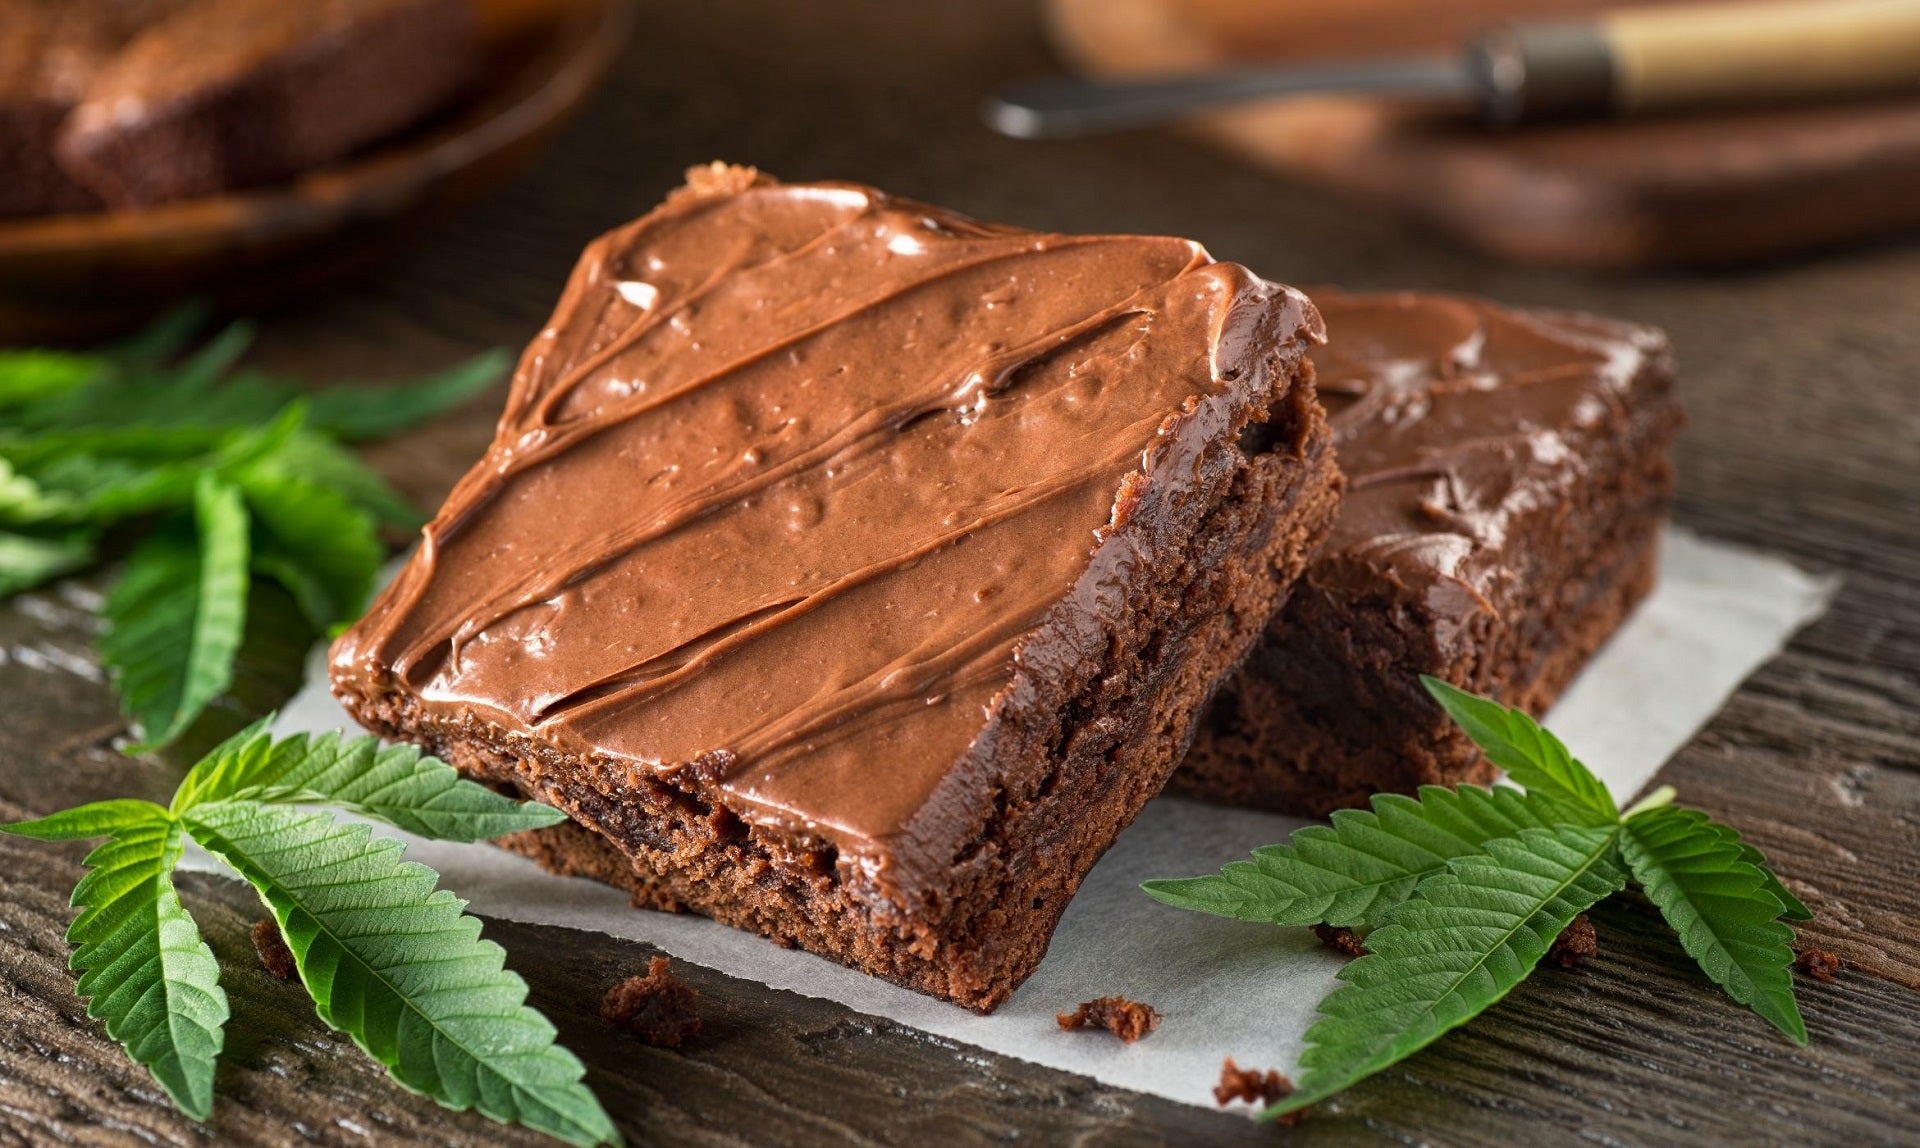 Edibles Recipes: The Best Cannabis Gummy Recipe in 2023 - Wake and Bake